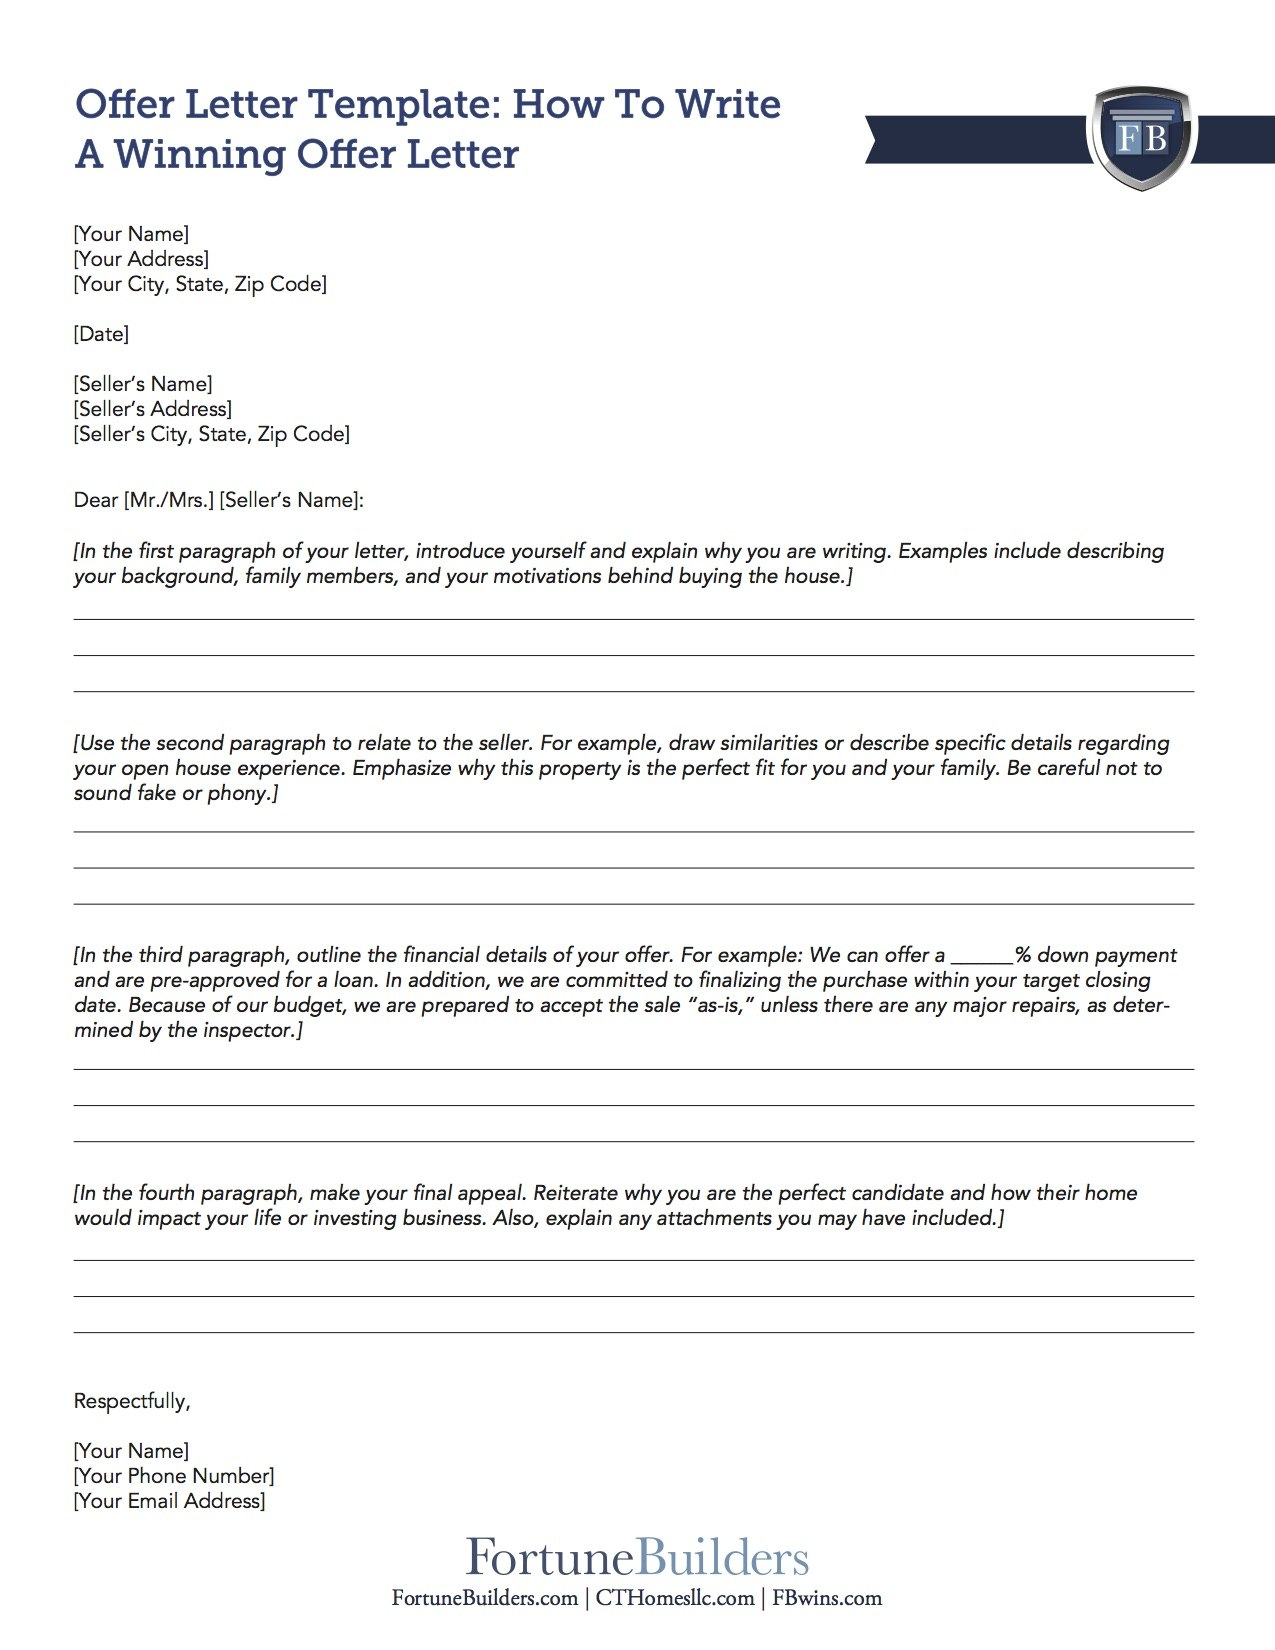 Free Real Estate Offer Letter Template  Fortunebuilders with Real Estate Offer Letter Template